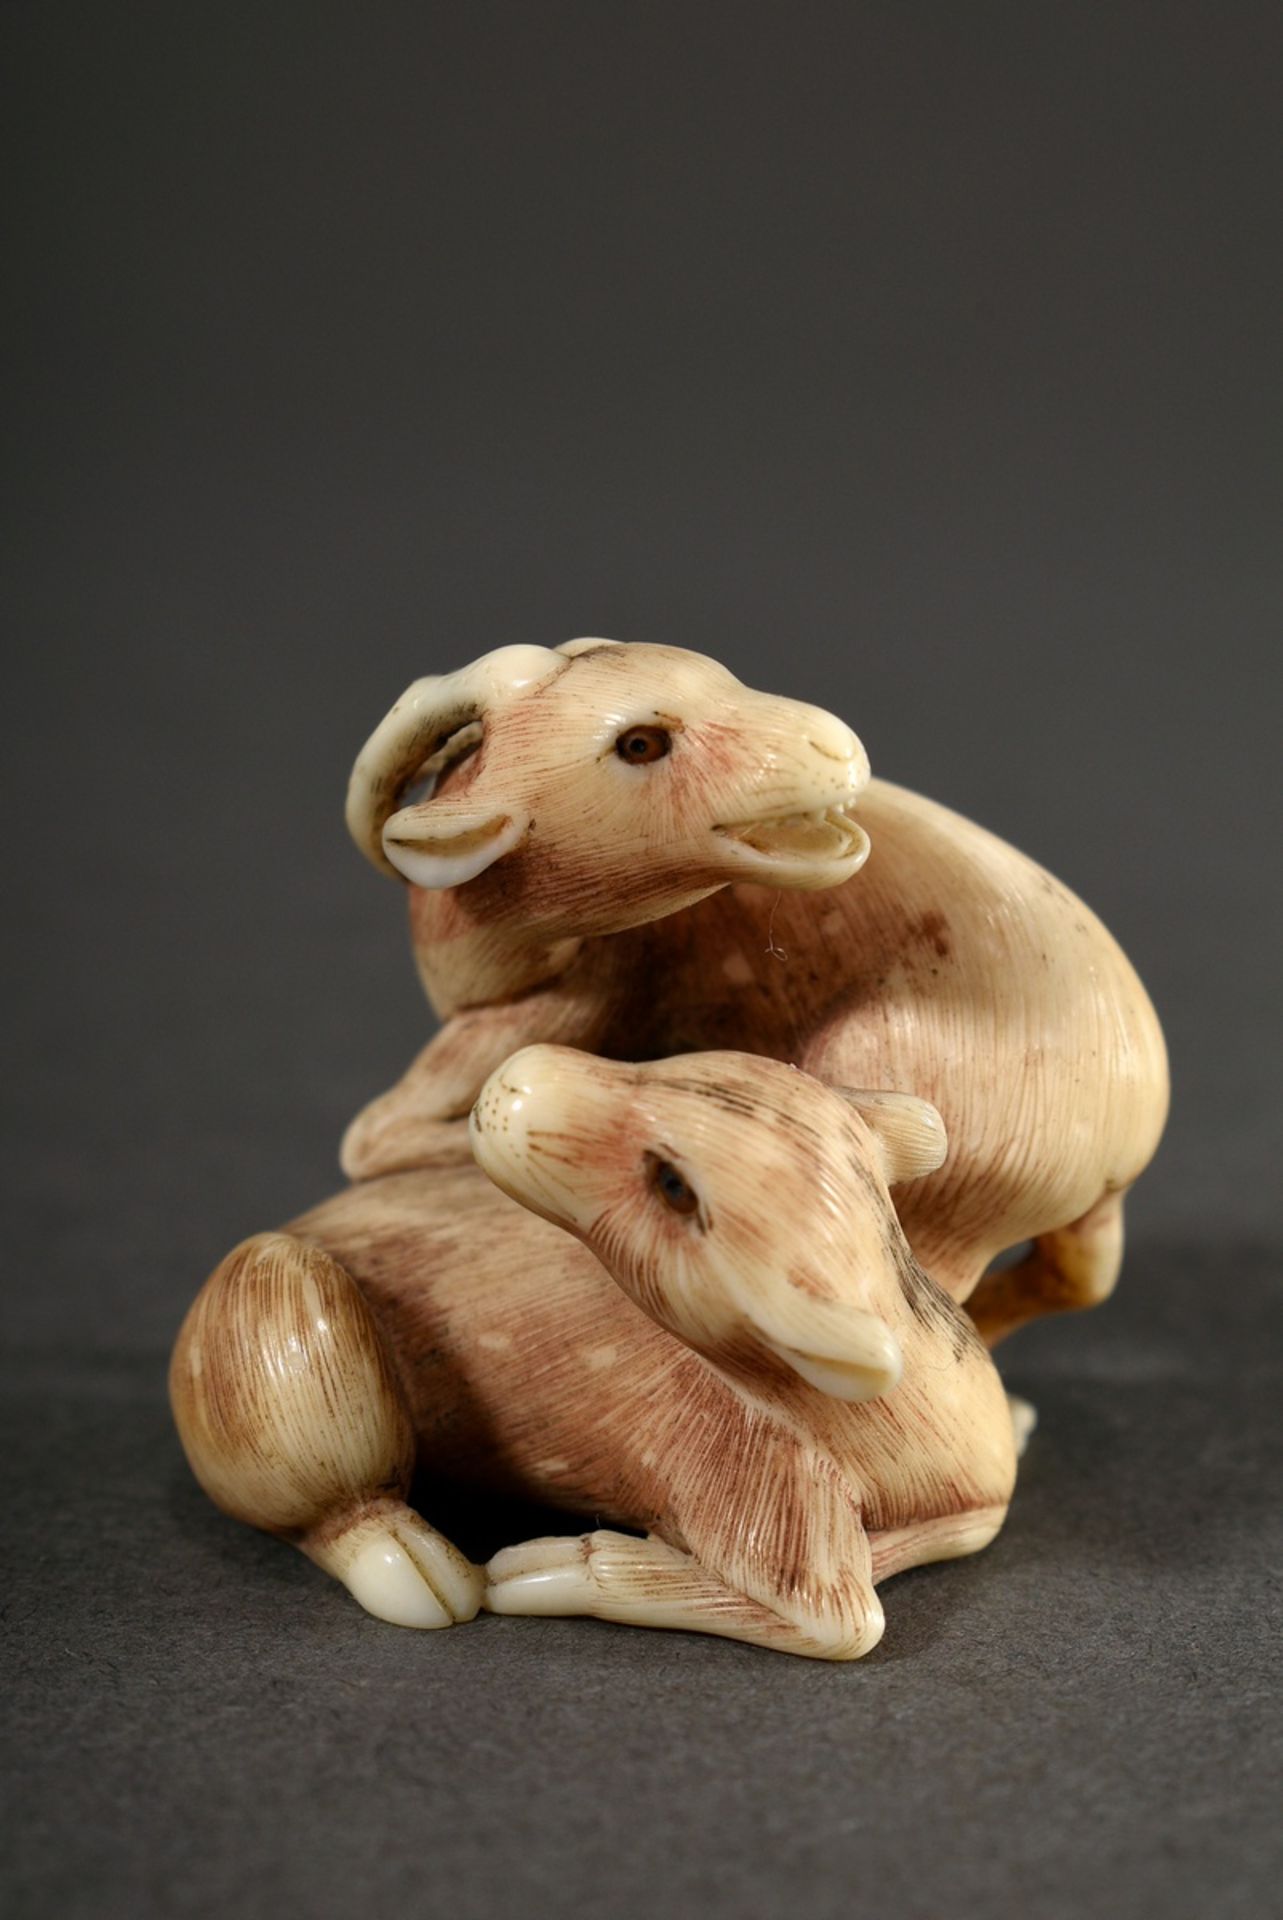 Ivory netsuke "Roaring deer with hind on maple foliage" with finely engraved and partially dyed fur